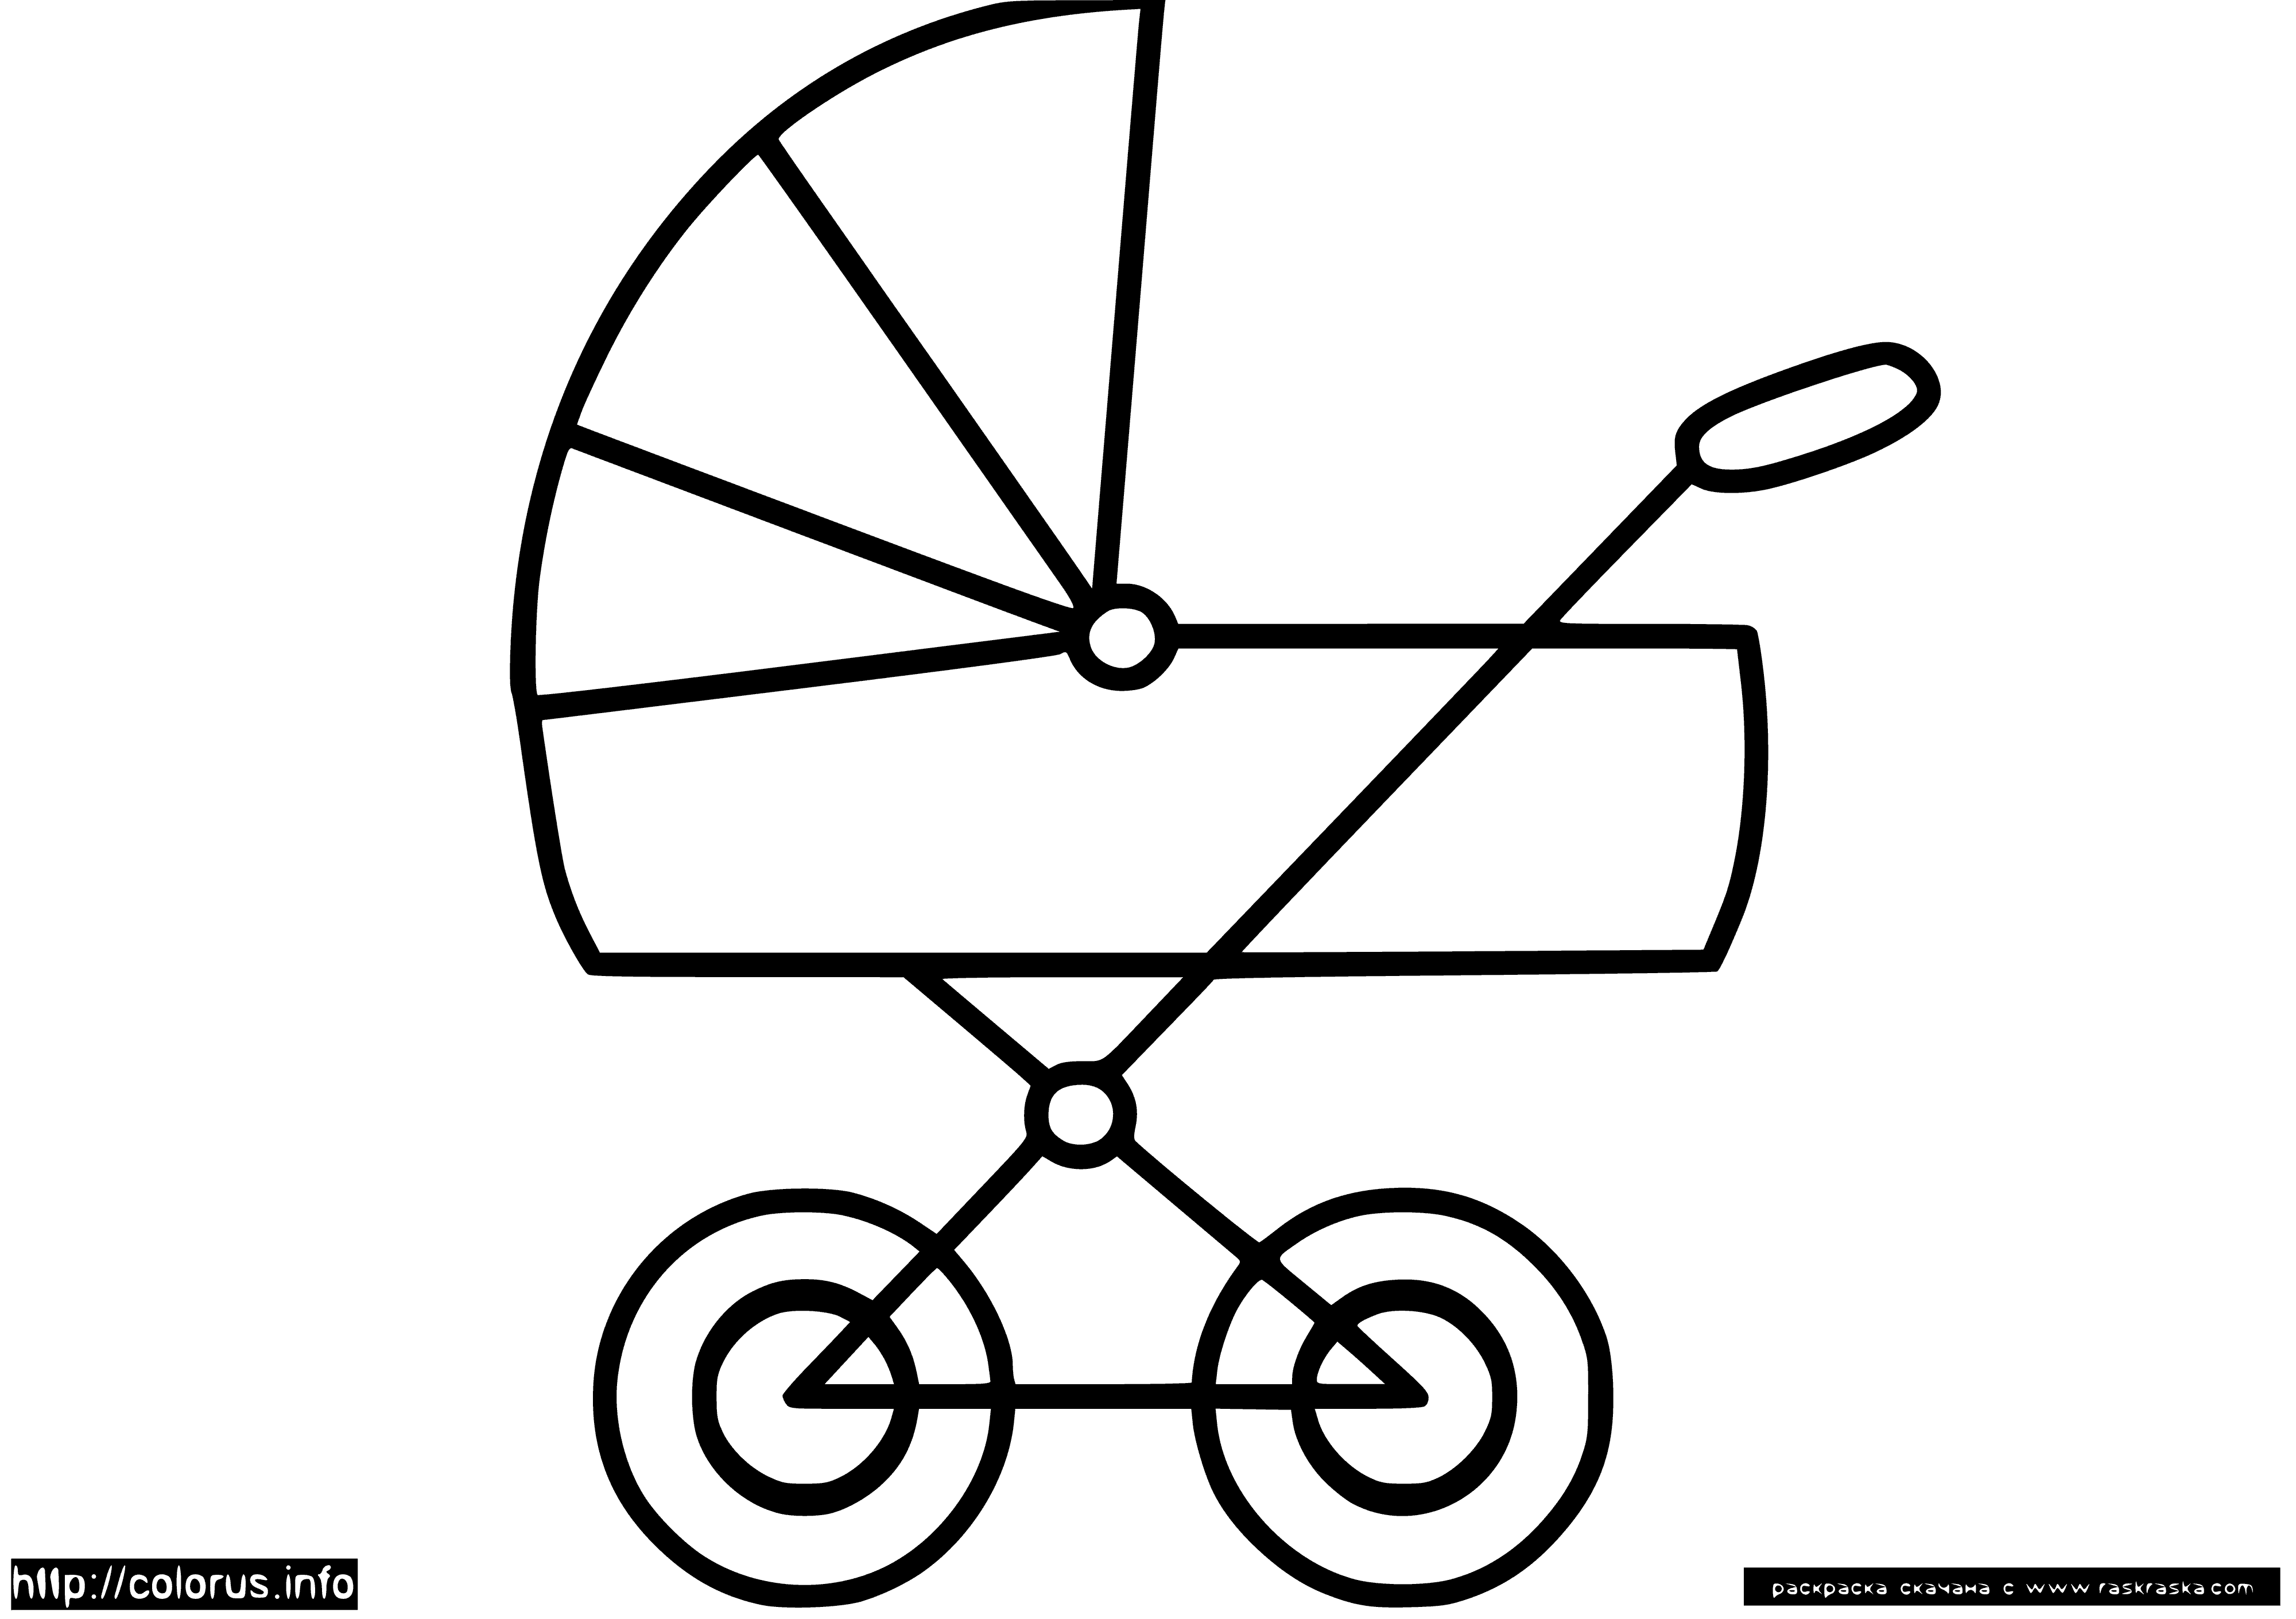 coloring page: Baby in yellow stroller wearing blue onesie. #cute